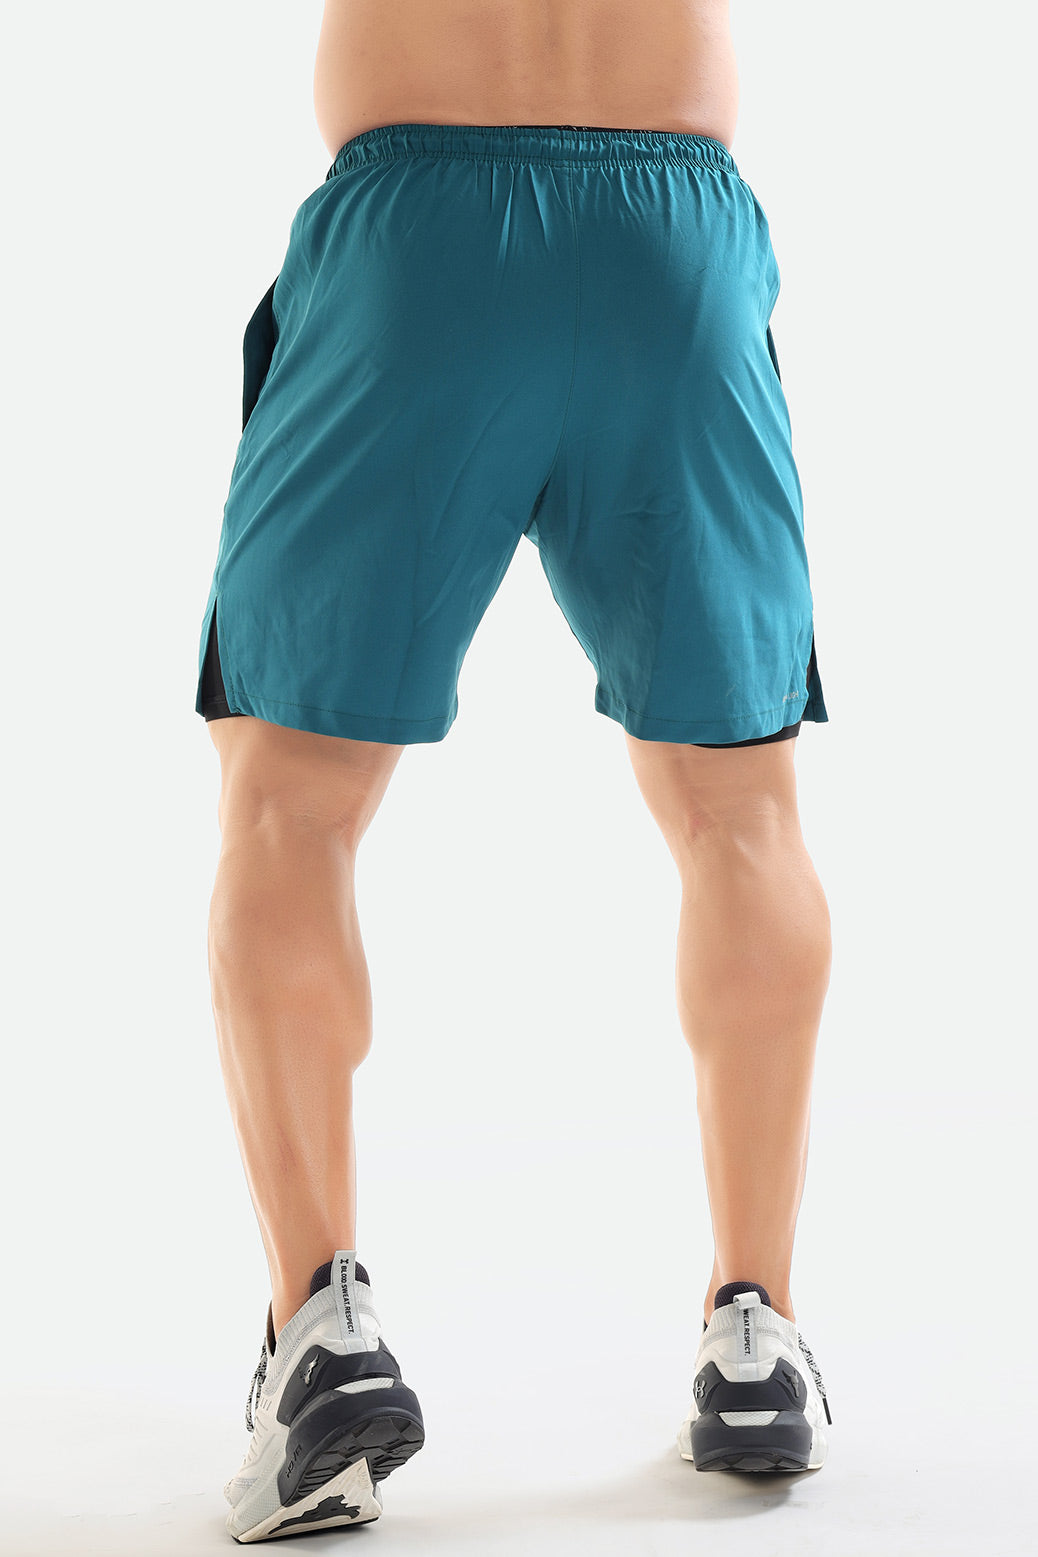 2 in 1 Compression Shorts Teal